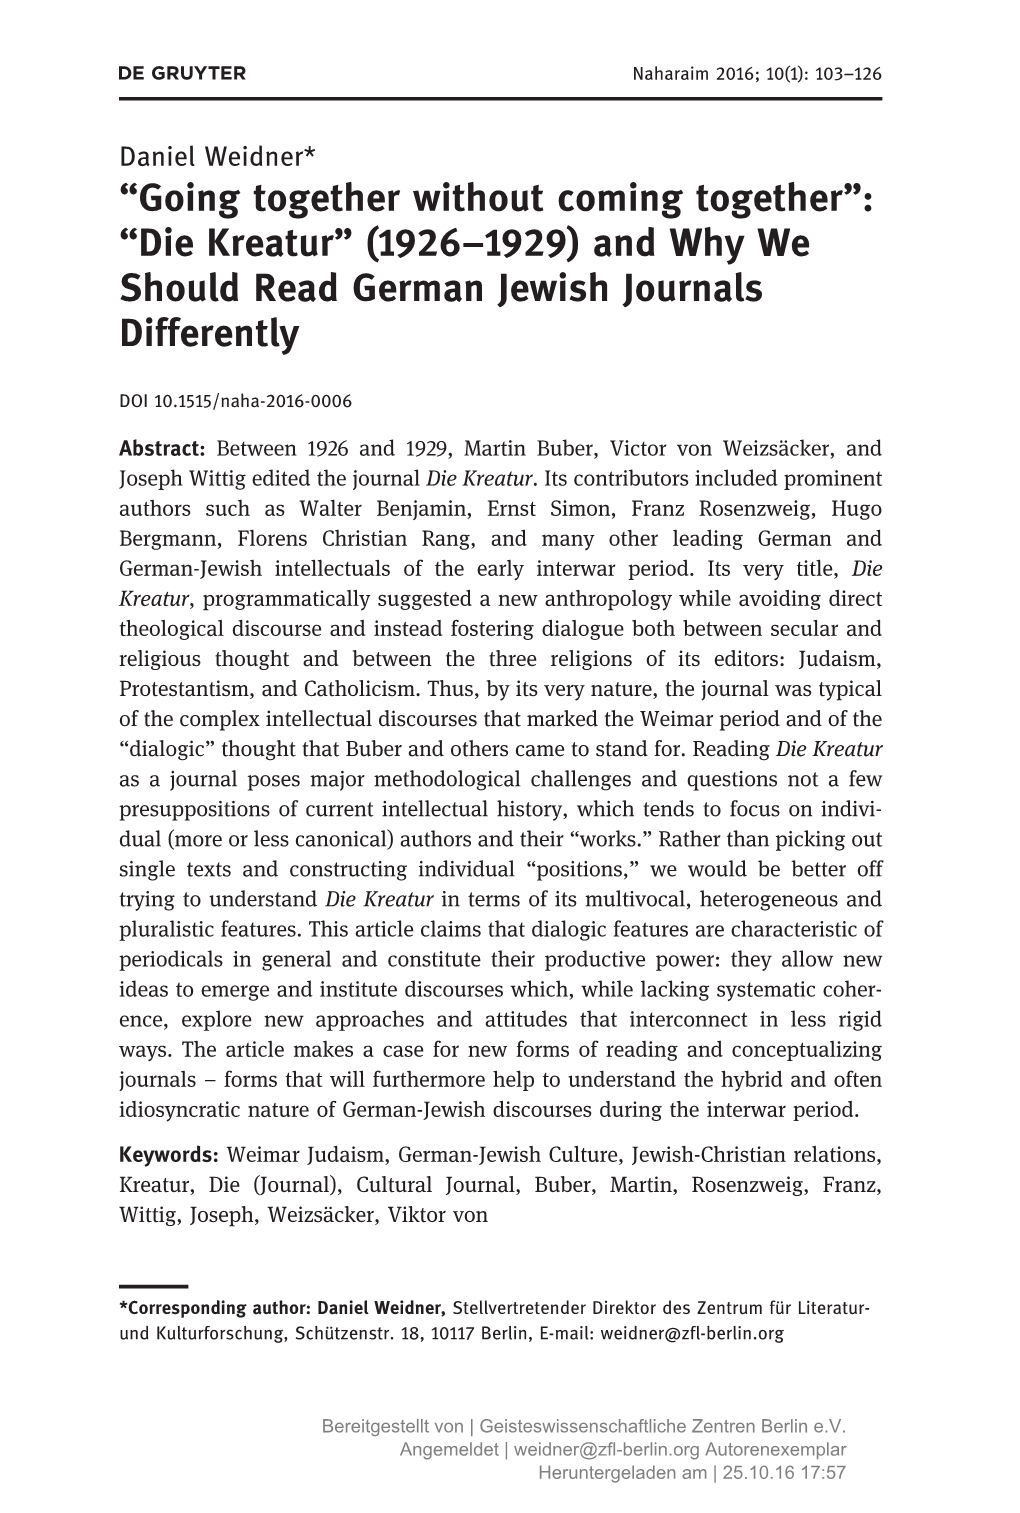 “Die Kreatur” (1926–1929) and Why We Should Read German Jewish Journals Differently